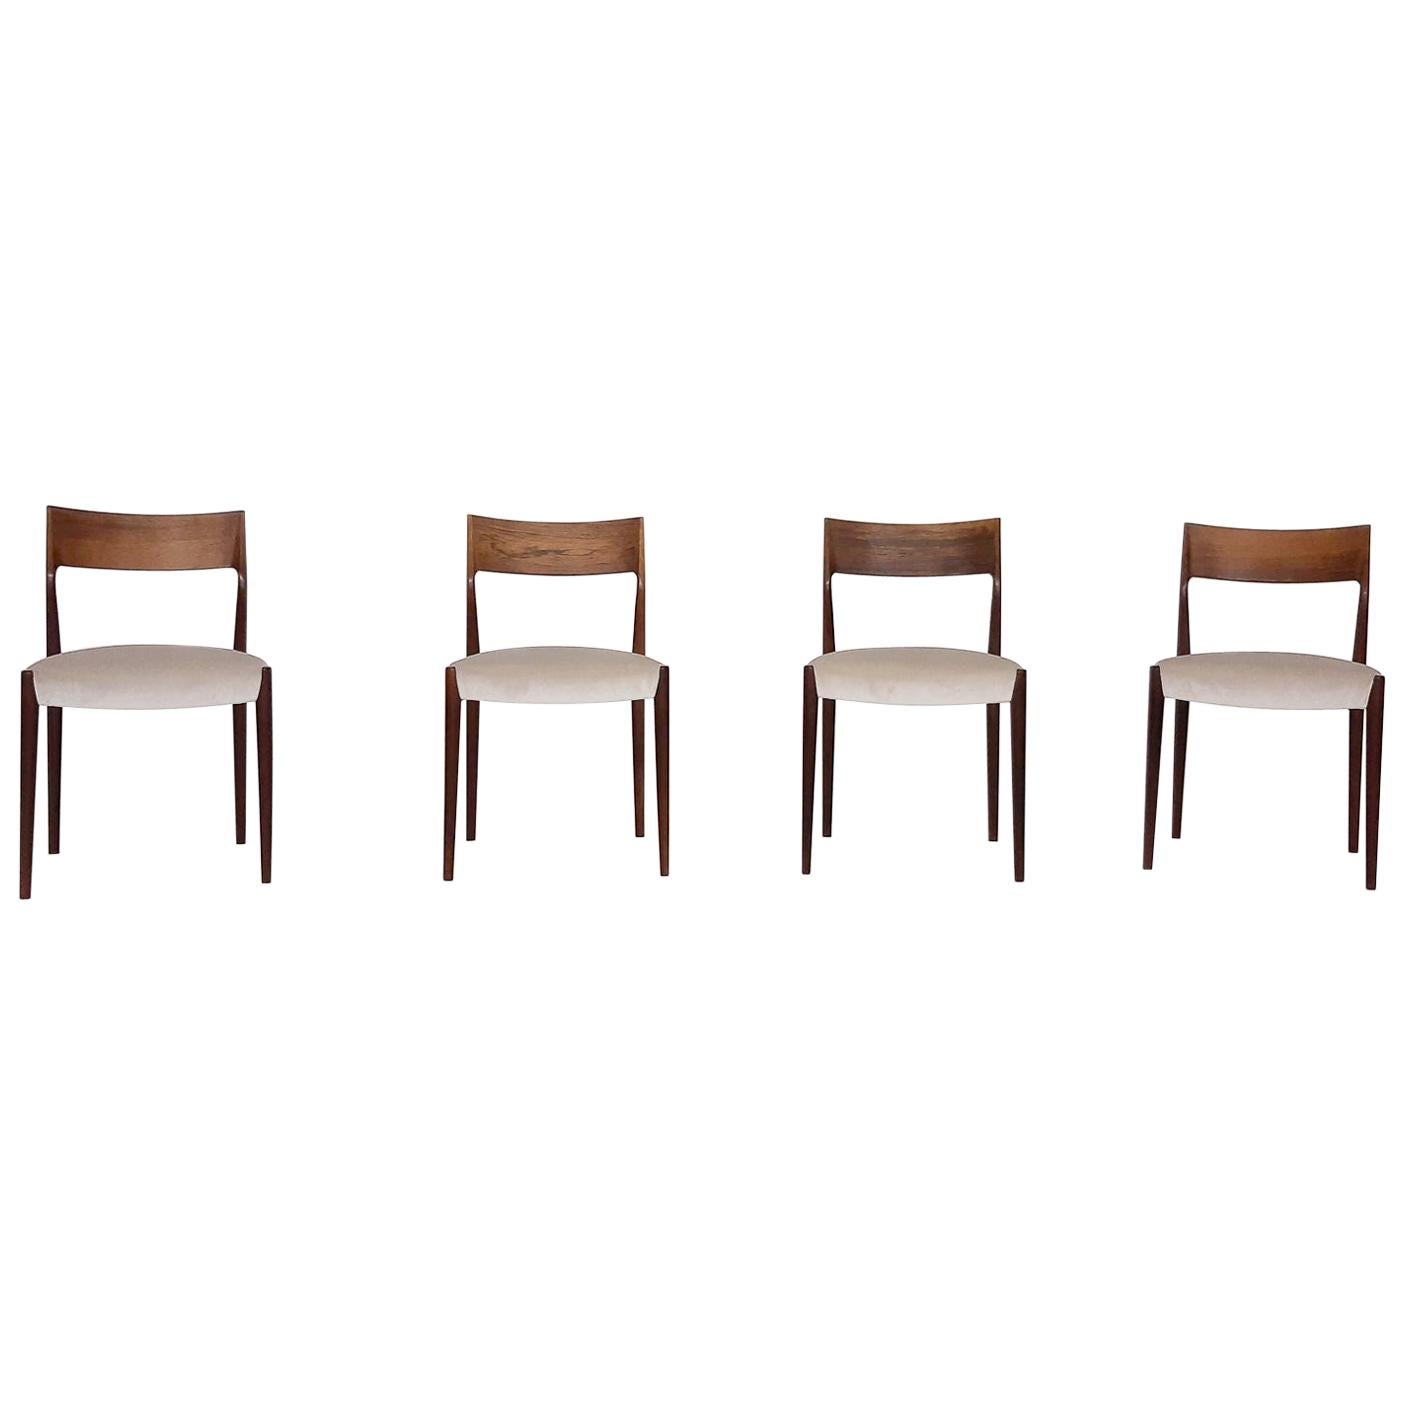 Set of 4 Rosewood Dining Chairs by Fristho, the Netherlands, 1960s